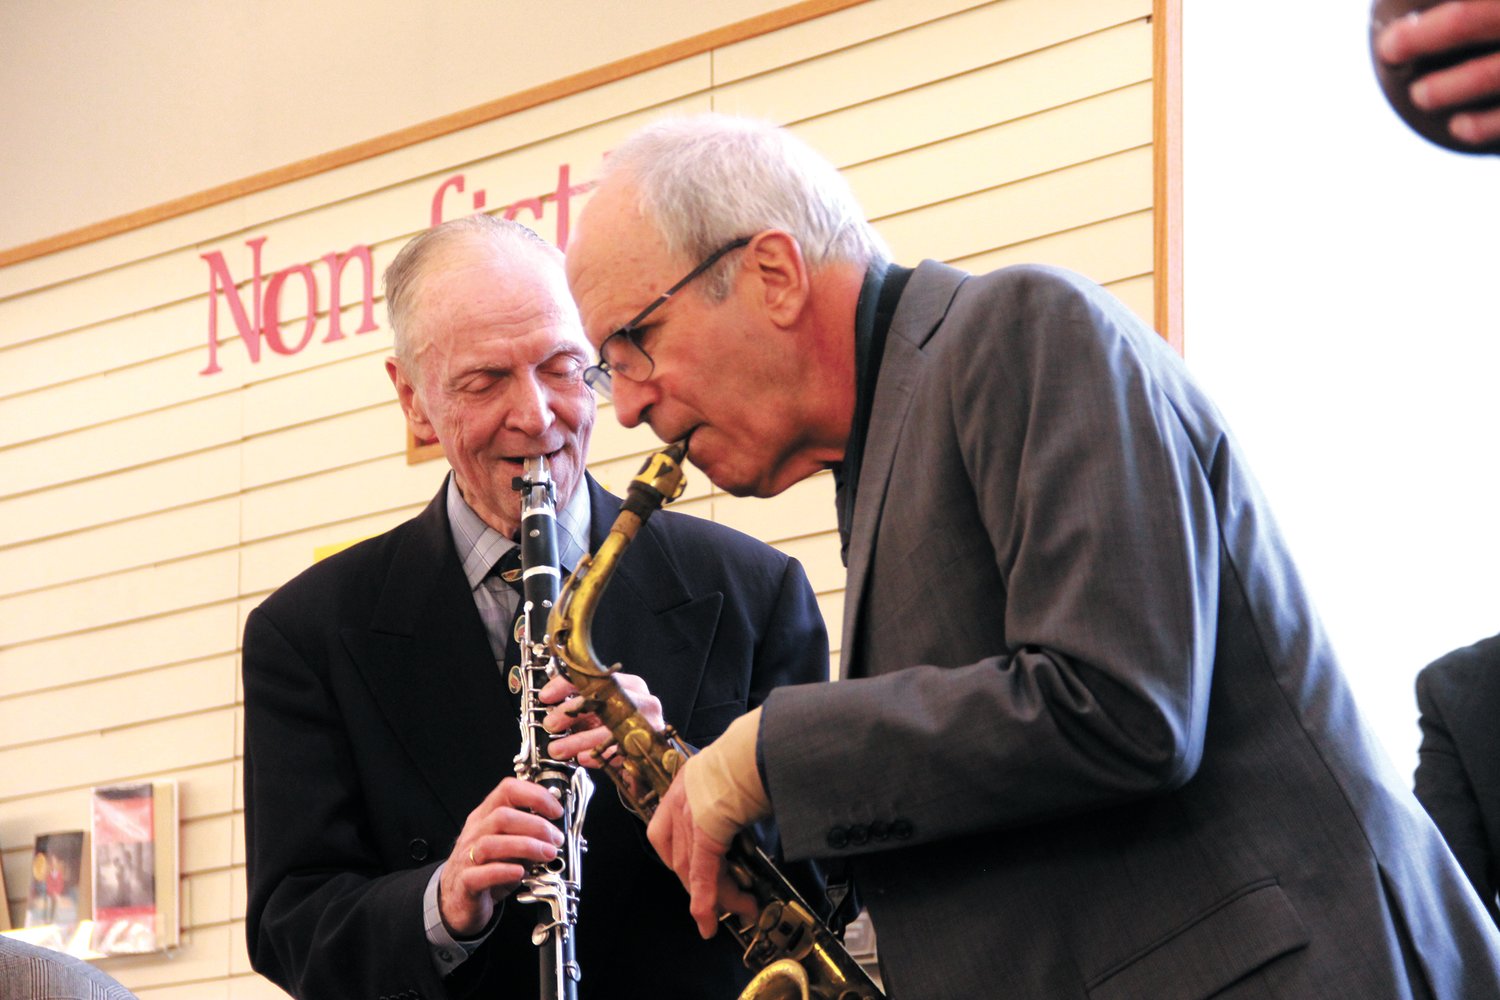 IN THE SWING: Craig Ball on clarinet and Billy Novick on sax connect on the piece “Never Tell a Lie.”